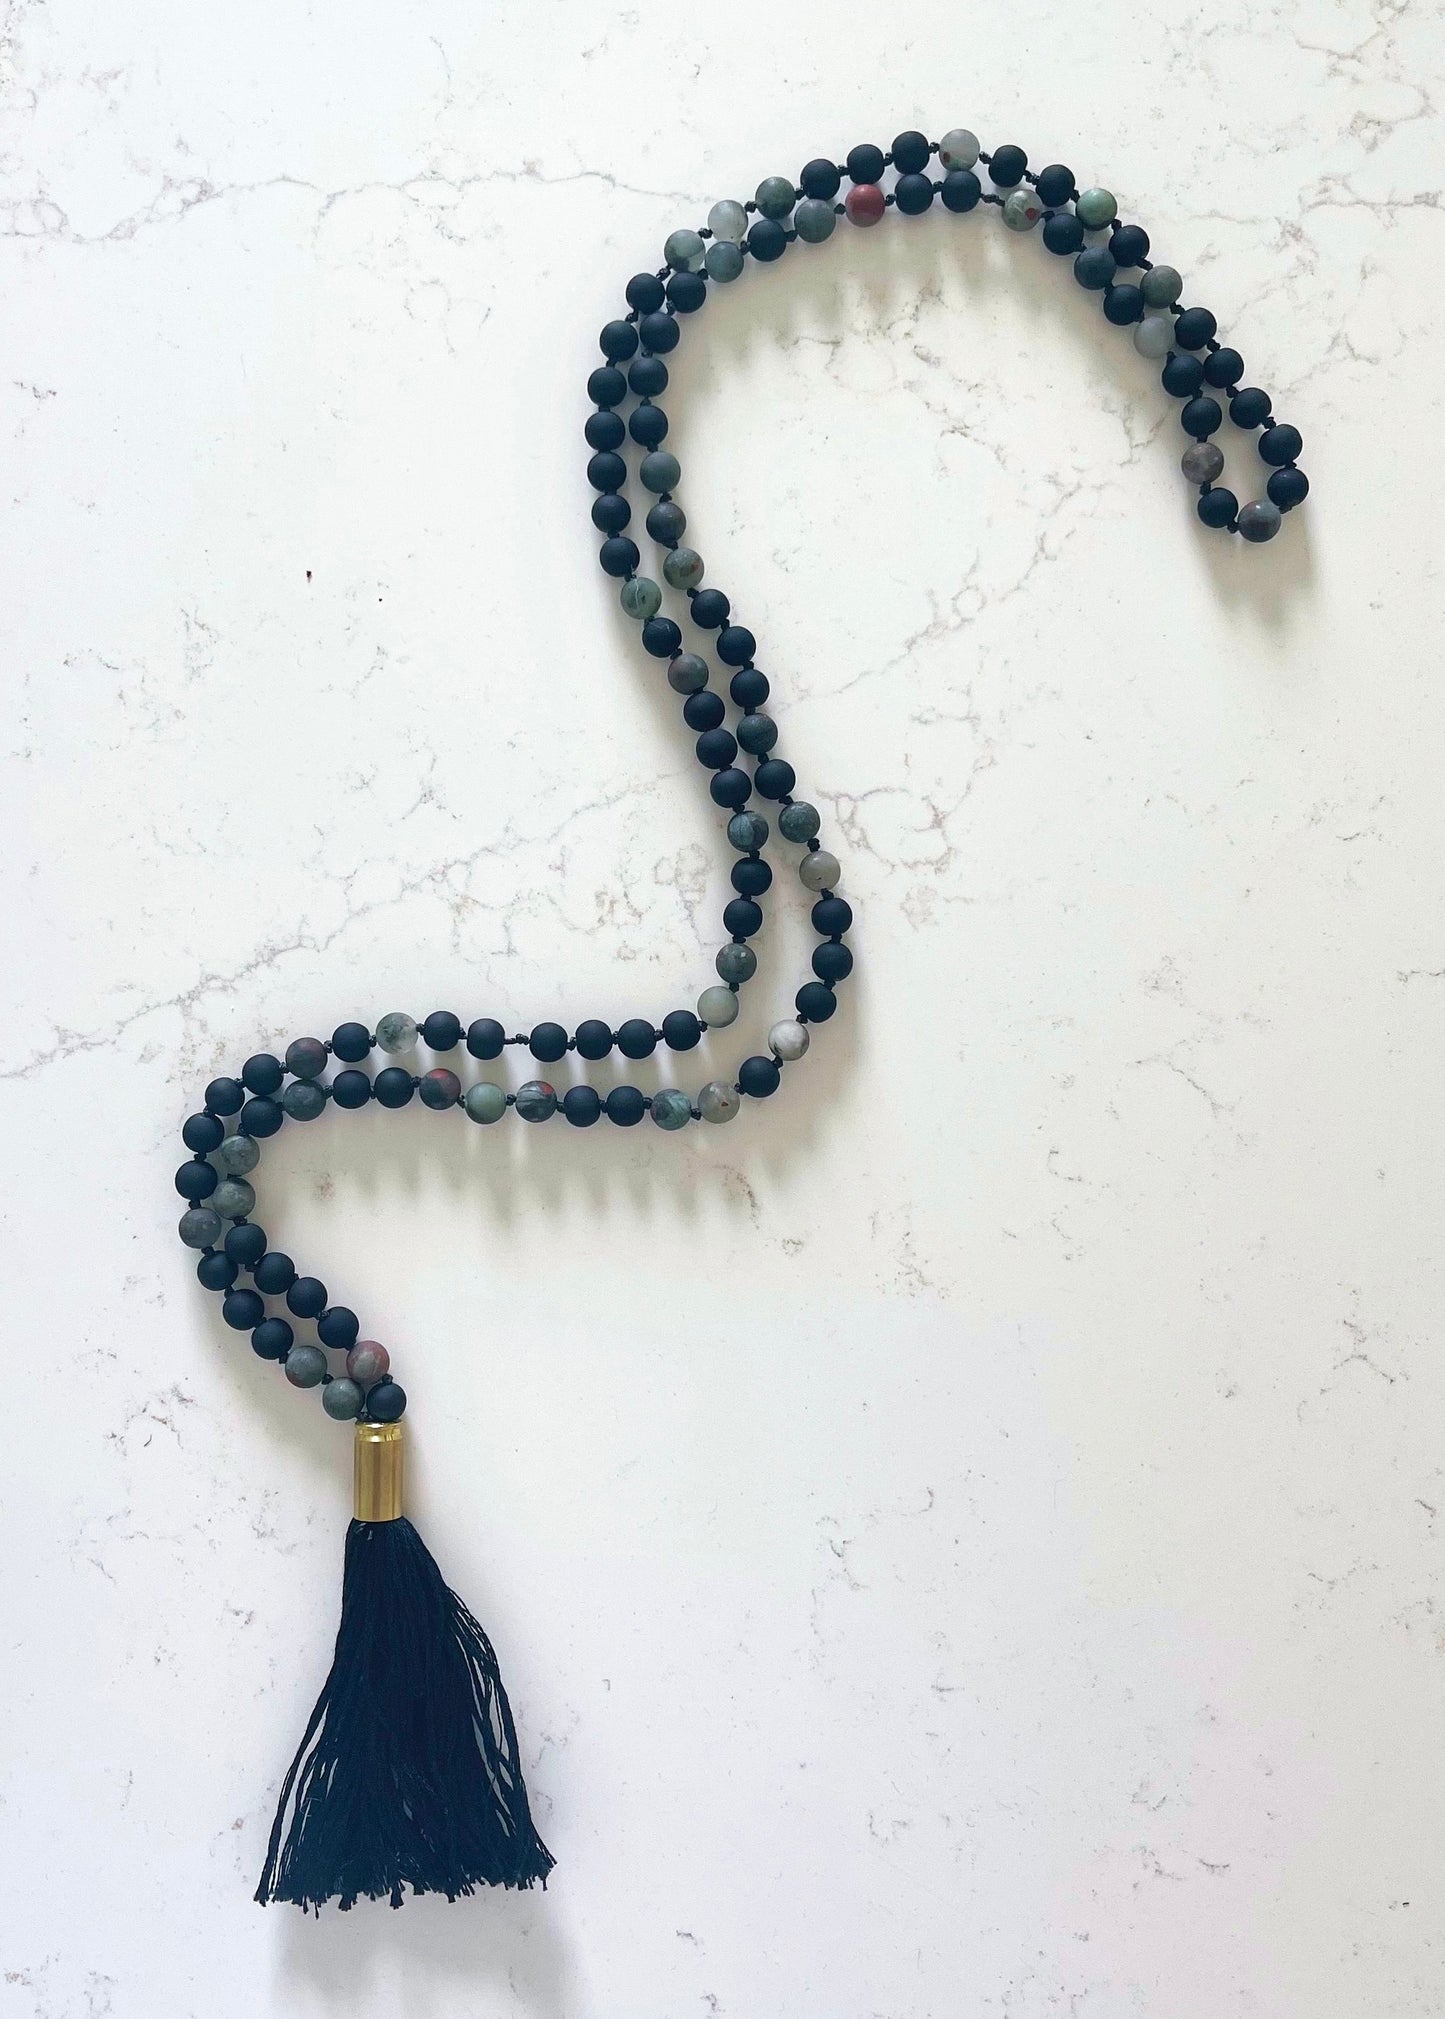 Matte Black and Earth Tones Mala Necklace with Black Tassel